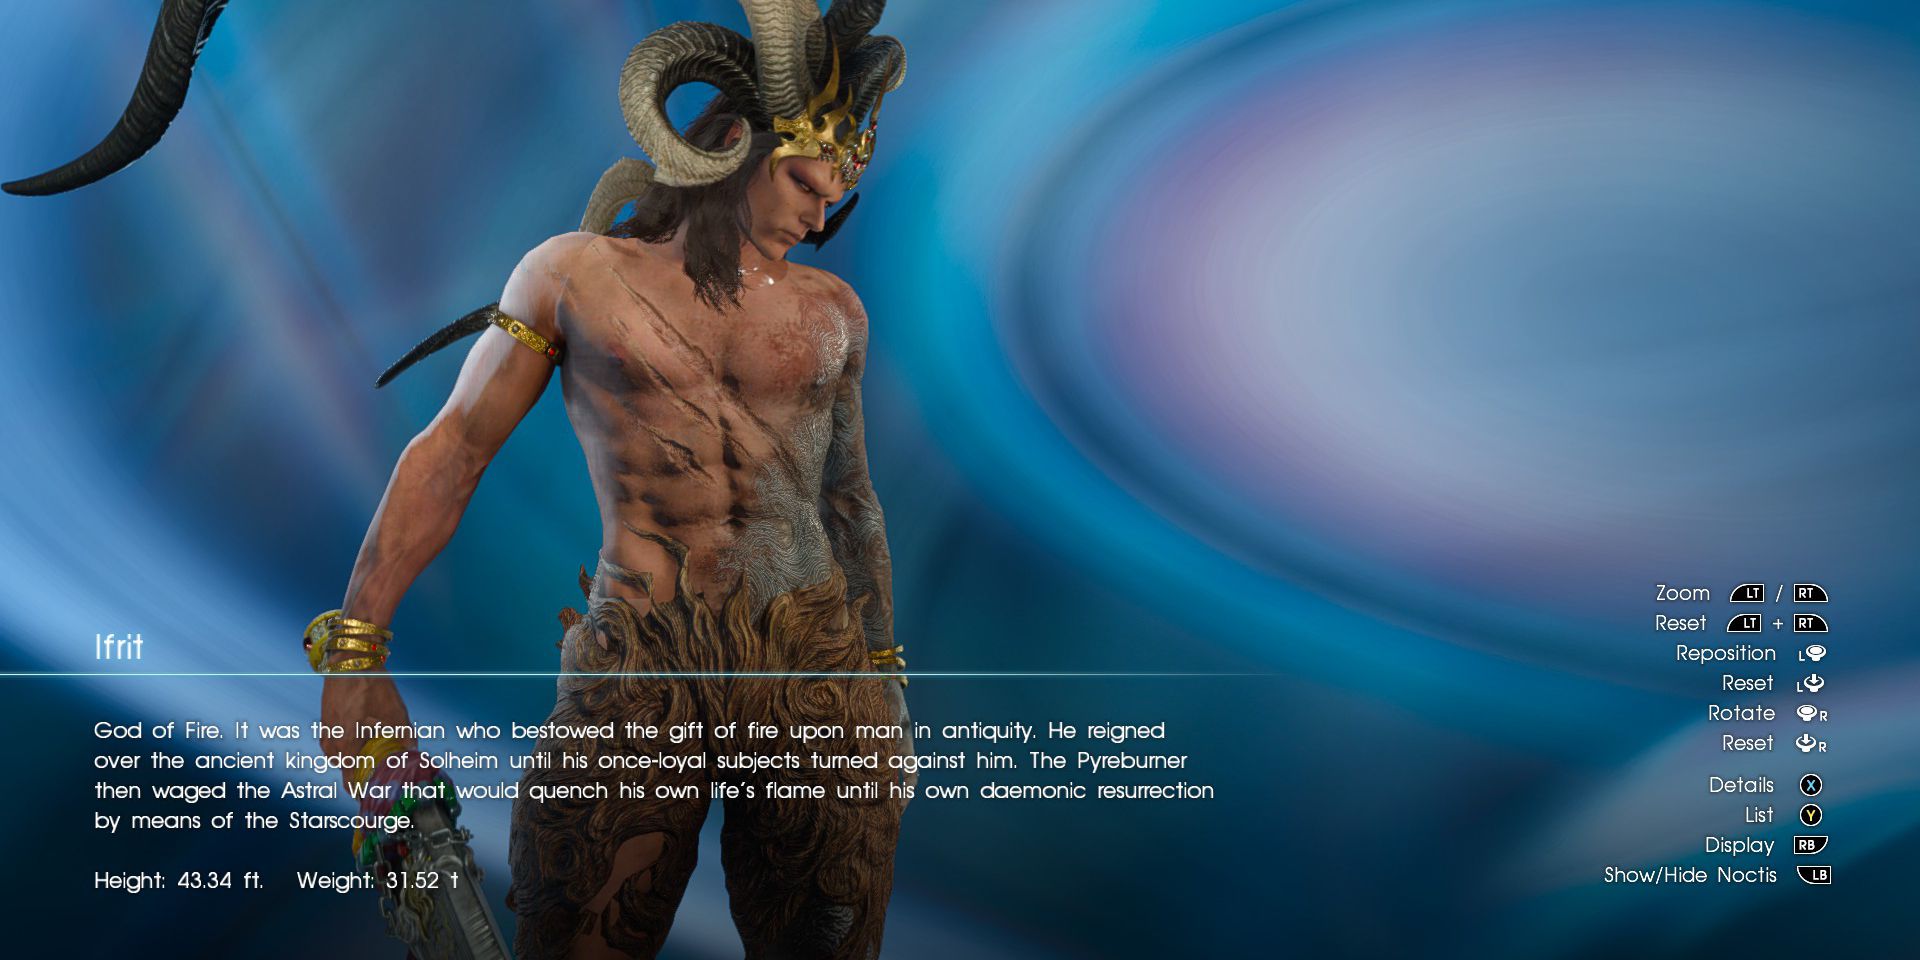 Ifrit archive entry in Final Fantasy XV that shows off his character model